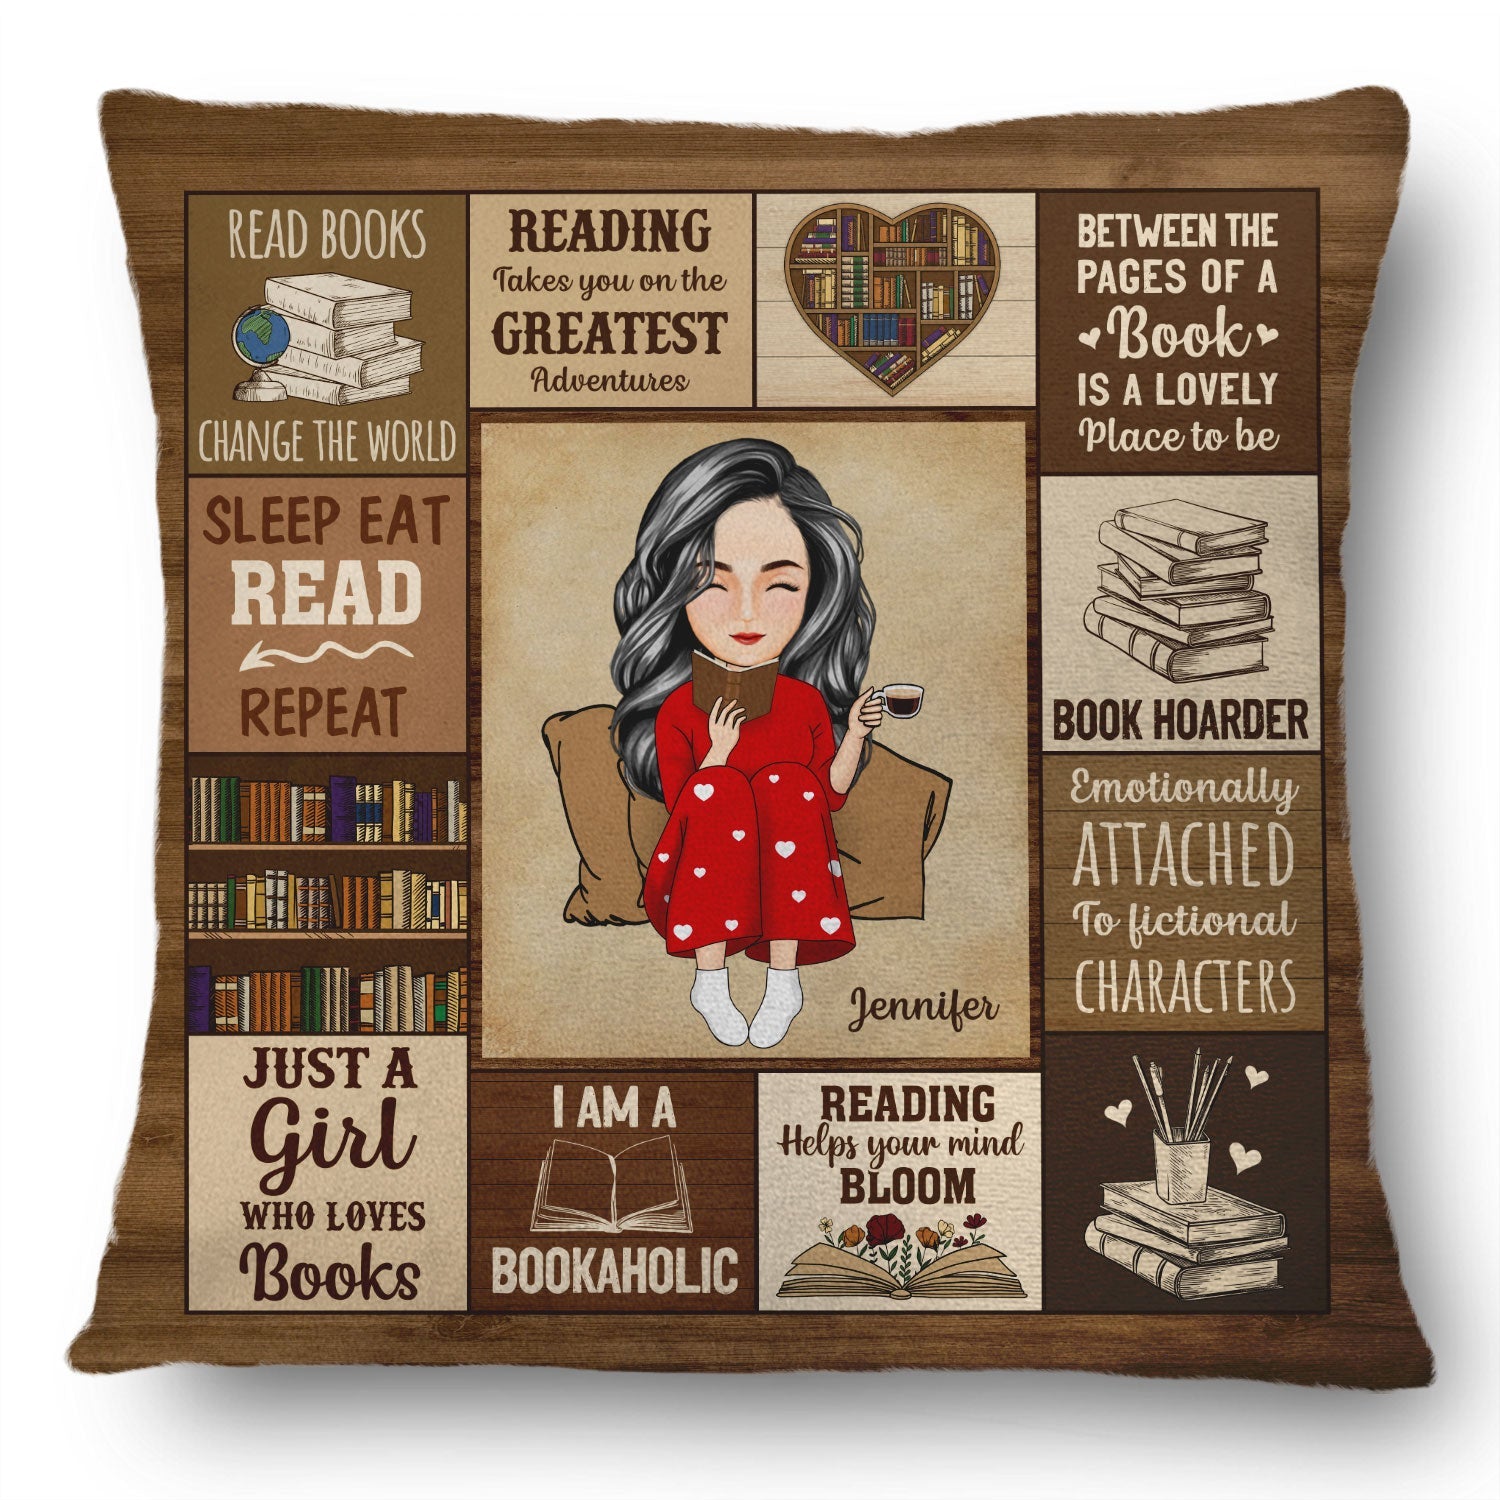 Reading My Reading Pillow I'm A Bookaholic - Gift For Book Lovers - Personalized Pillow